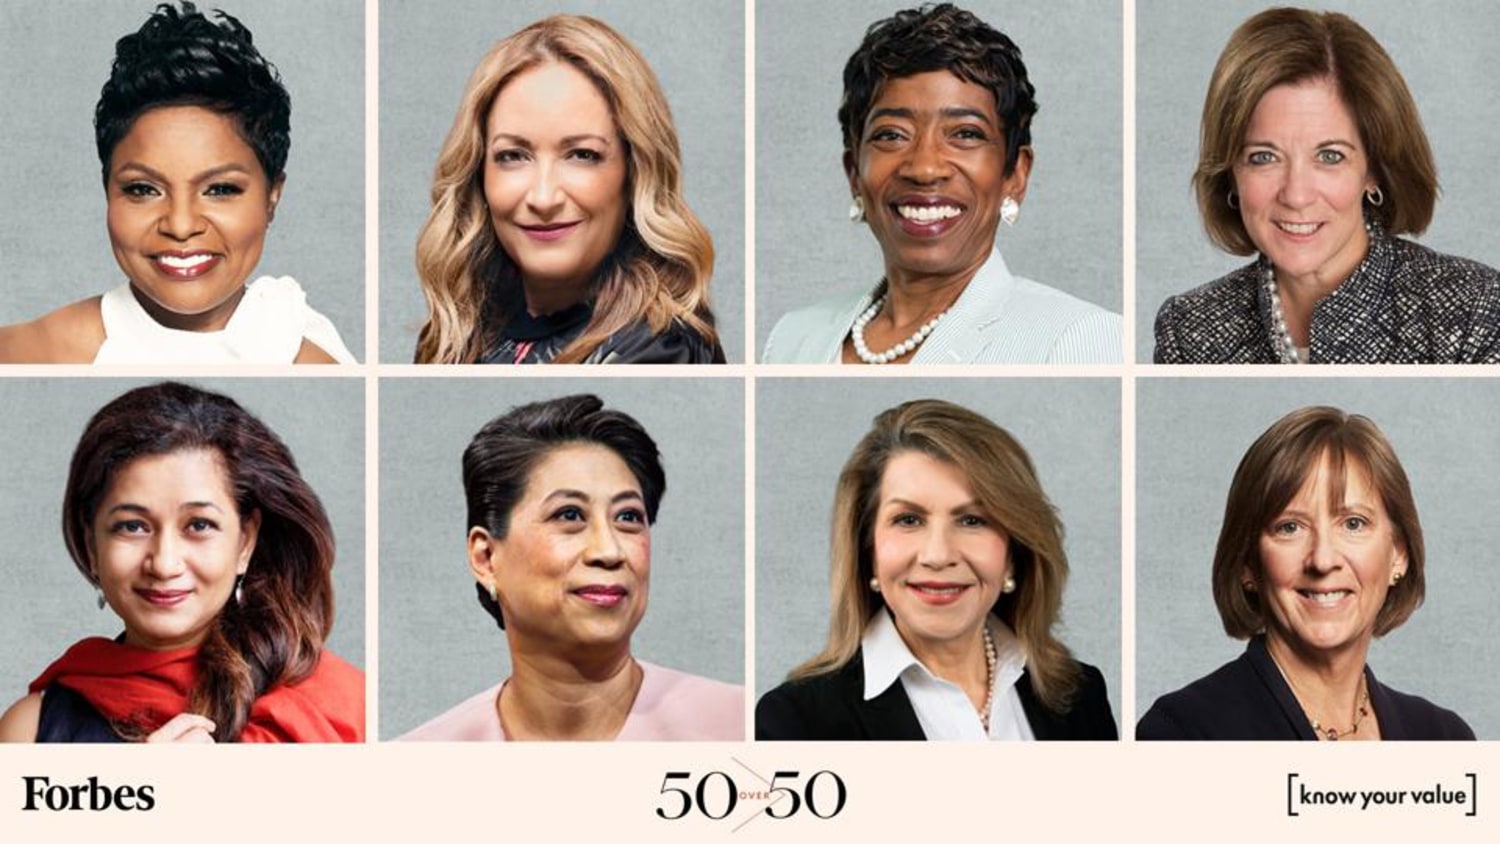 Meet the women over 50 who are creating new ways to make and move money